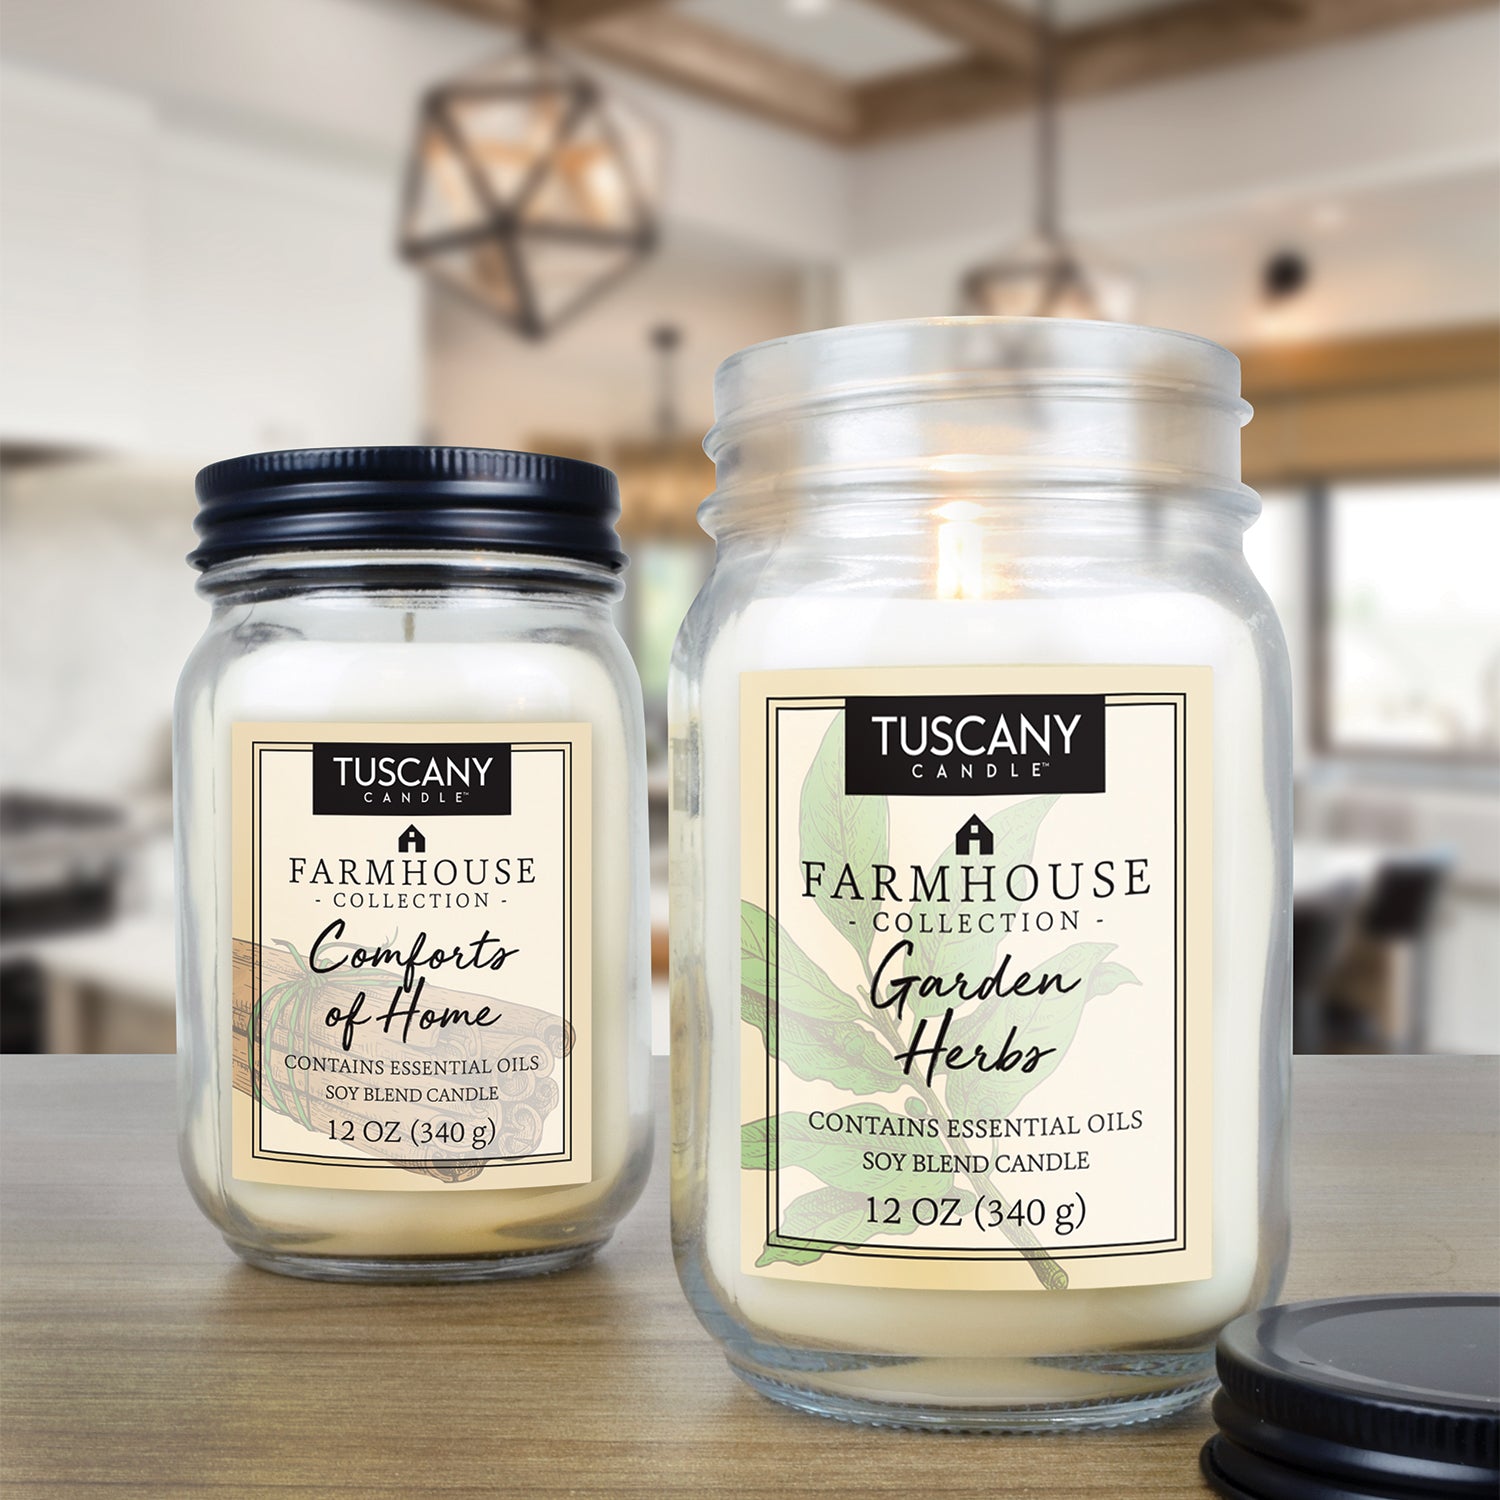 Tuscany Candle Farmhouse Collection Candle, Garden Herbs, Soy Blend - 1 candle, 12 oz